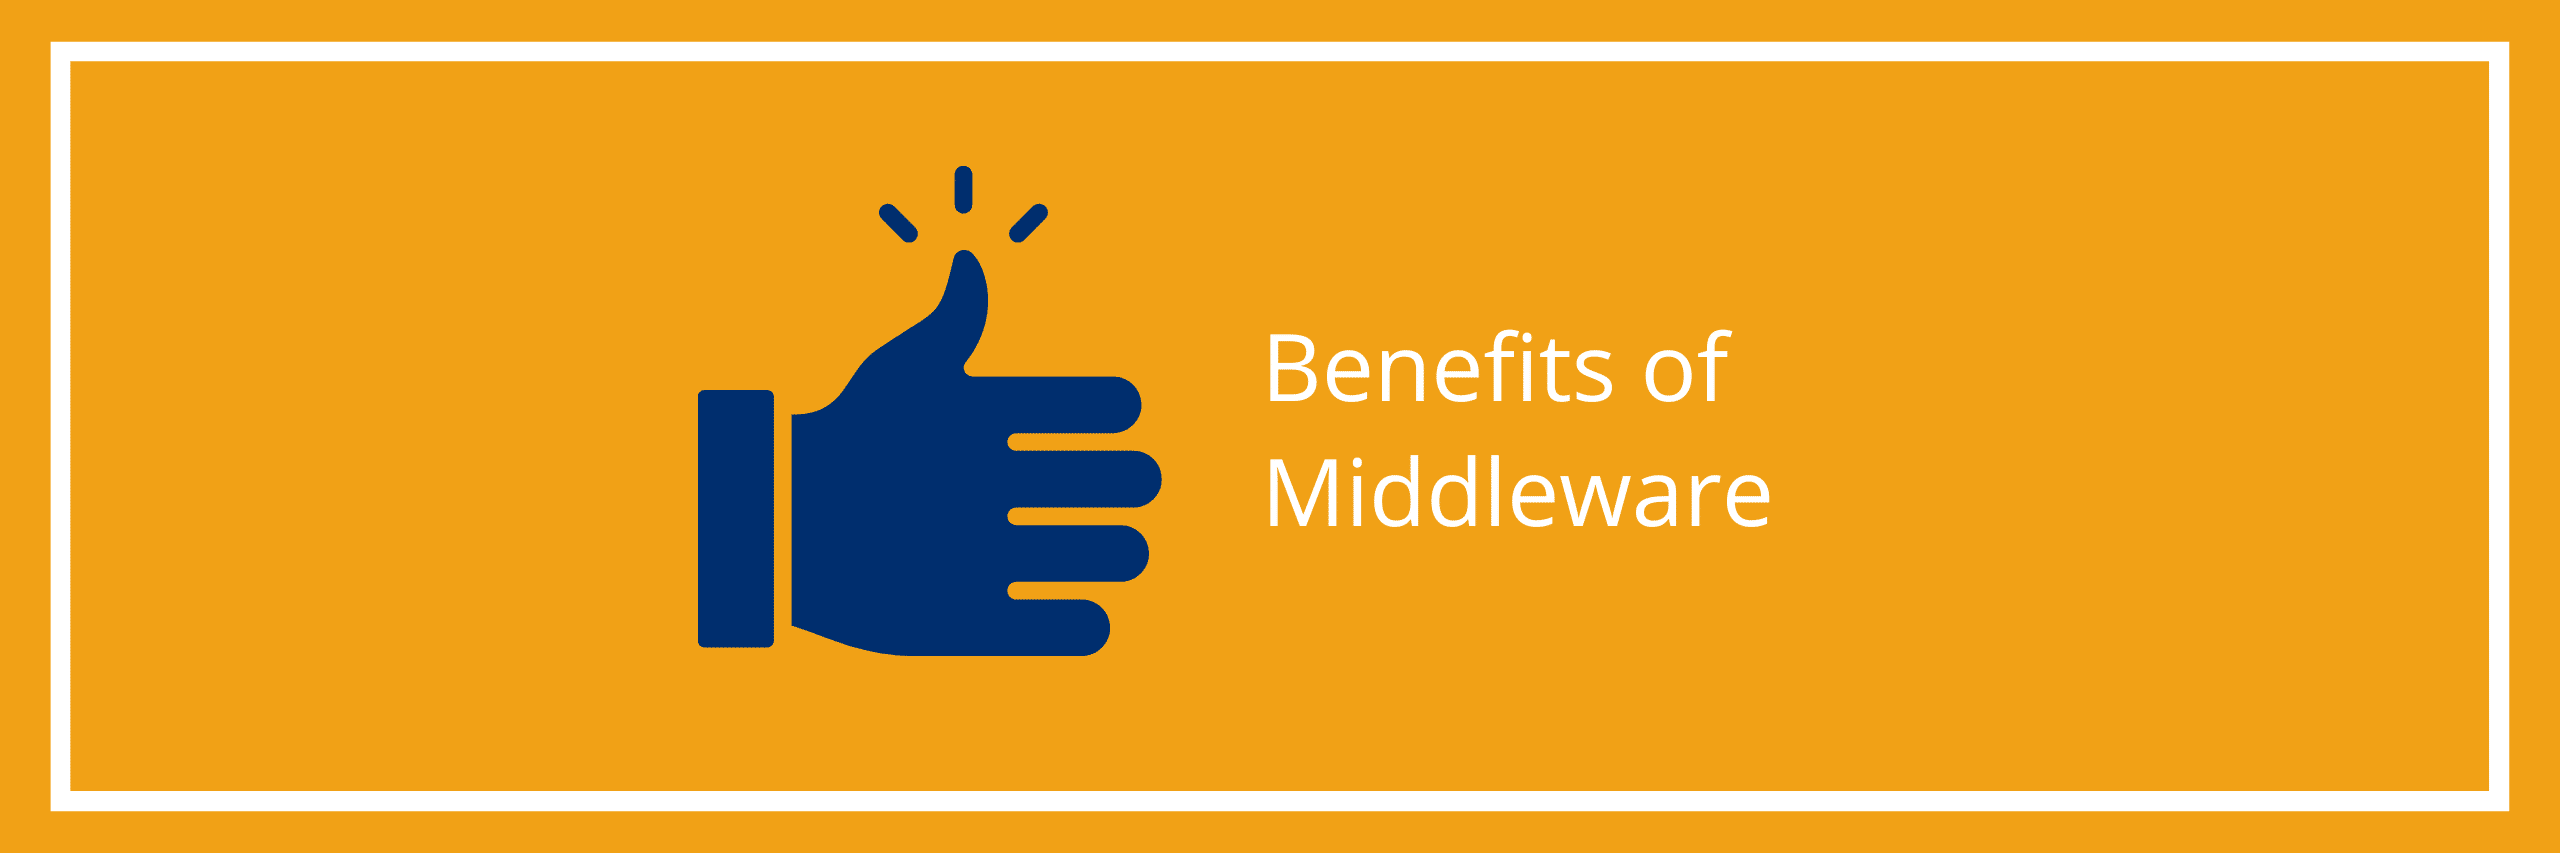 Benefits of Middleware